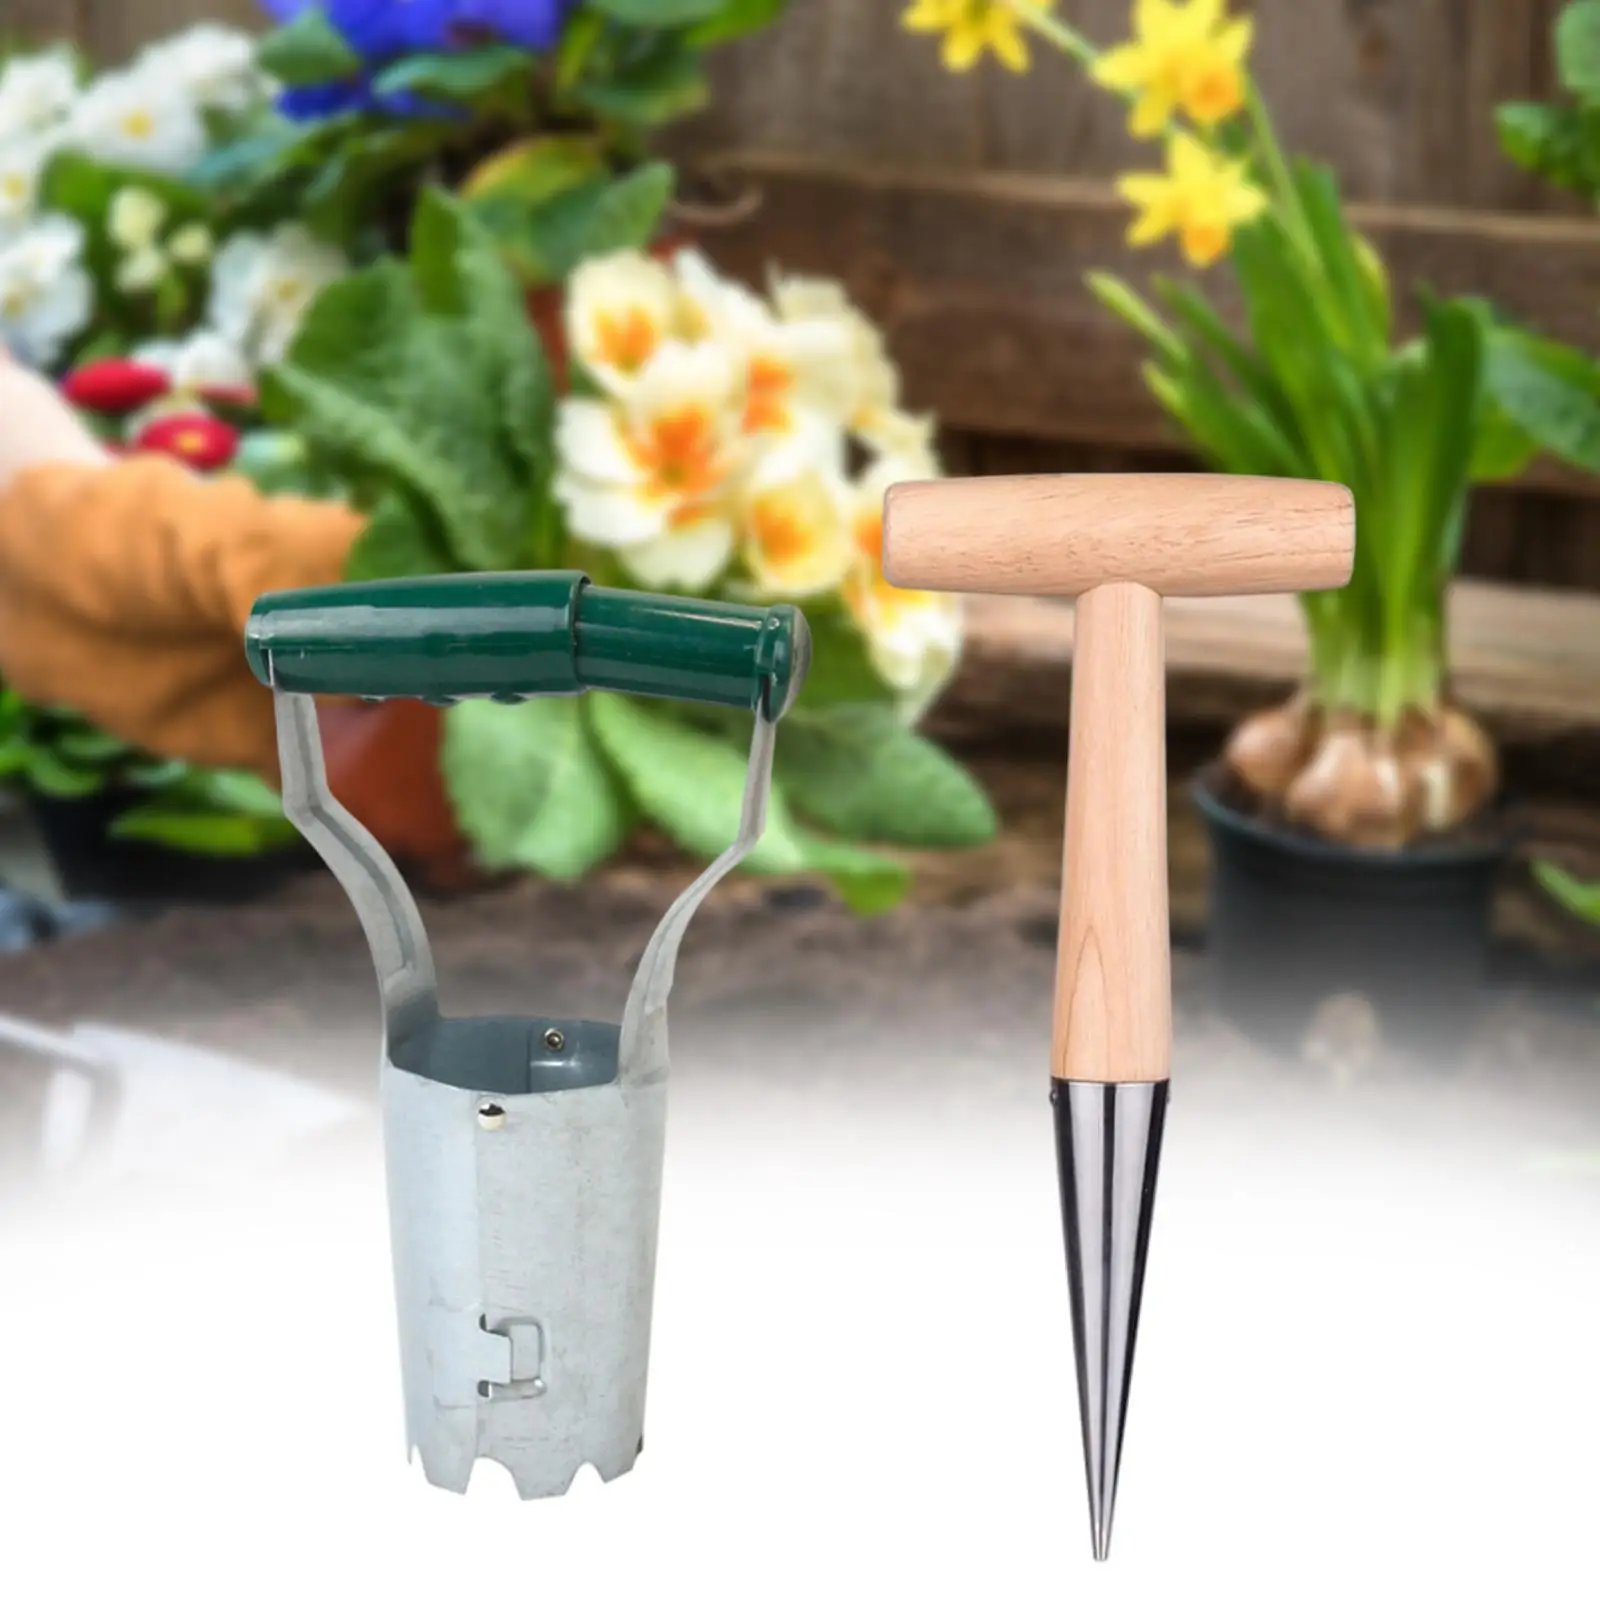 2x s and Bulb Tools Automatic Soil Release Seed Planter Tool Hand